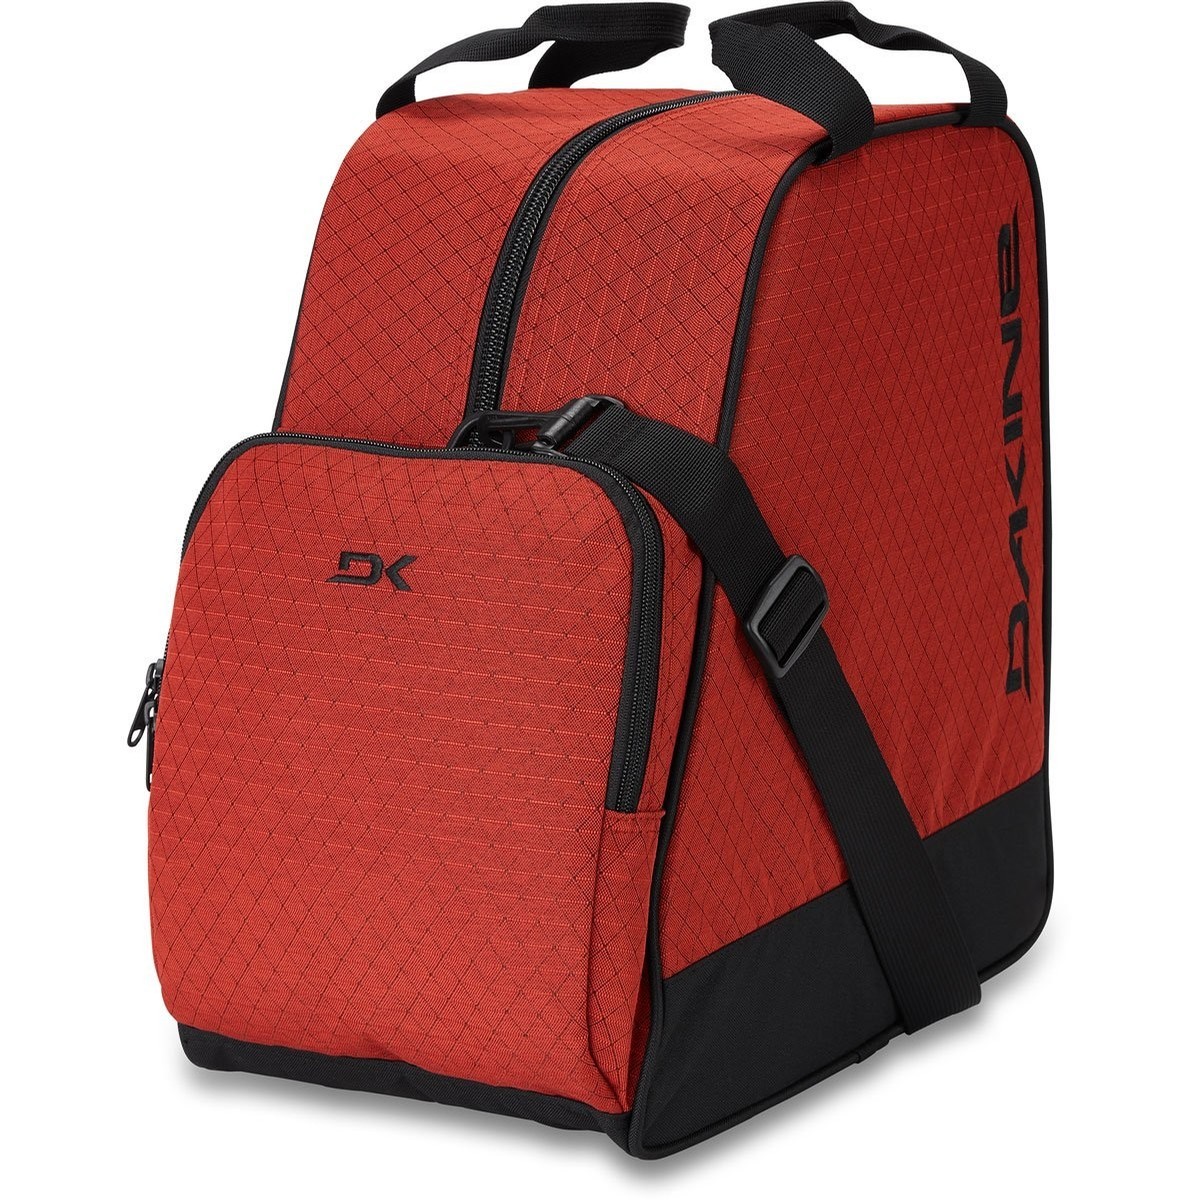 DAKINE BOOT BAG COLORS AVAILABLE BRAND NEW!!! - 